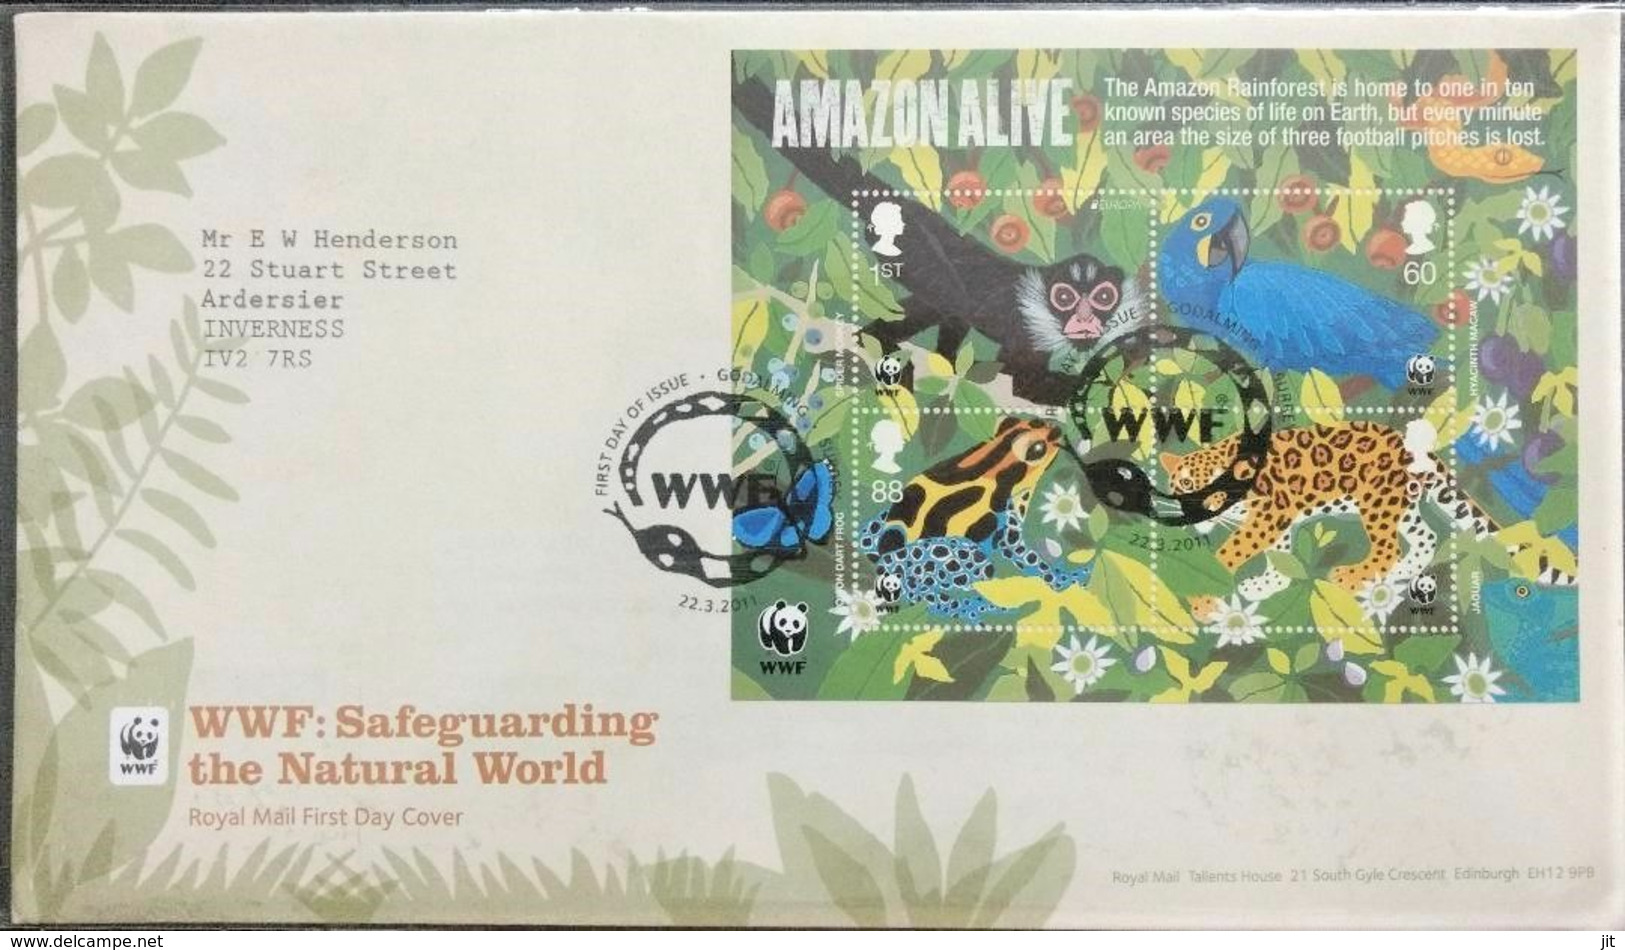 139. GREAT BRITAIN 2011 STAMP M/S WWF : SAFE GUARDING THE NATURAL WORLD, AMAZON ALIVE  FDC  . - 2011-2020 Decimal Issues